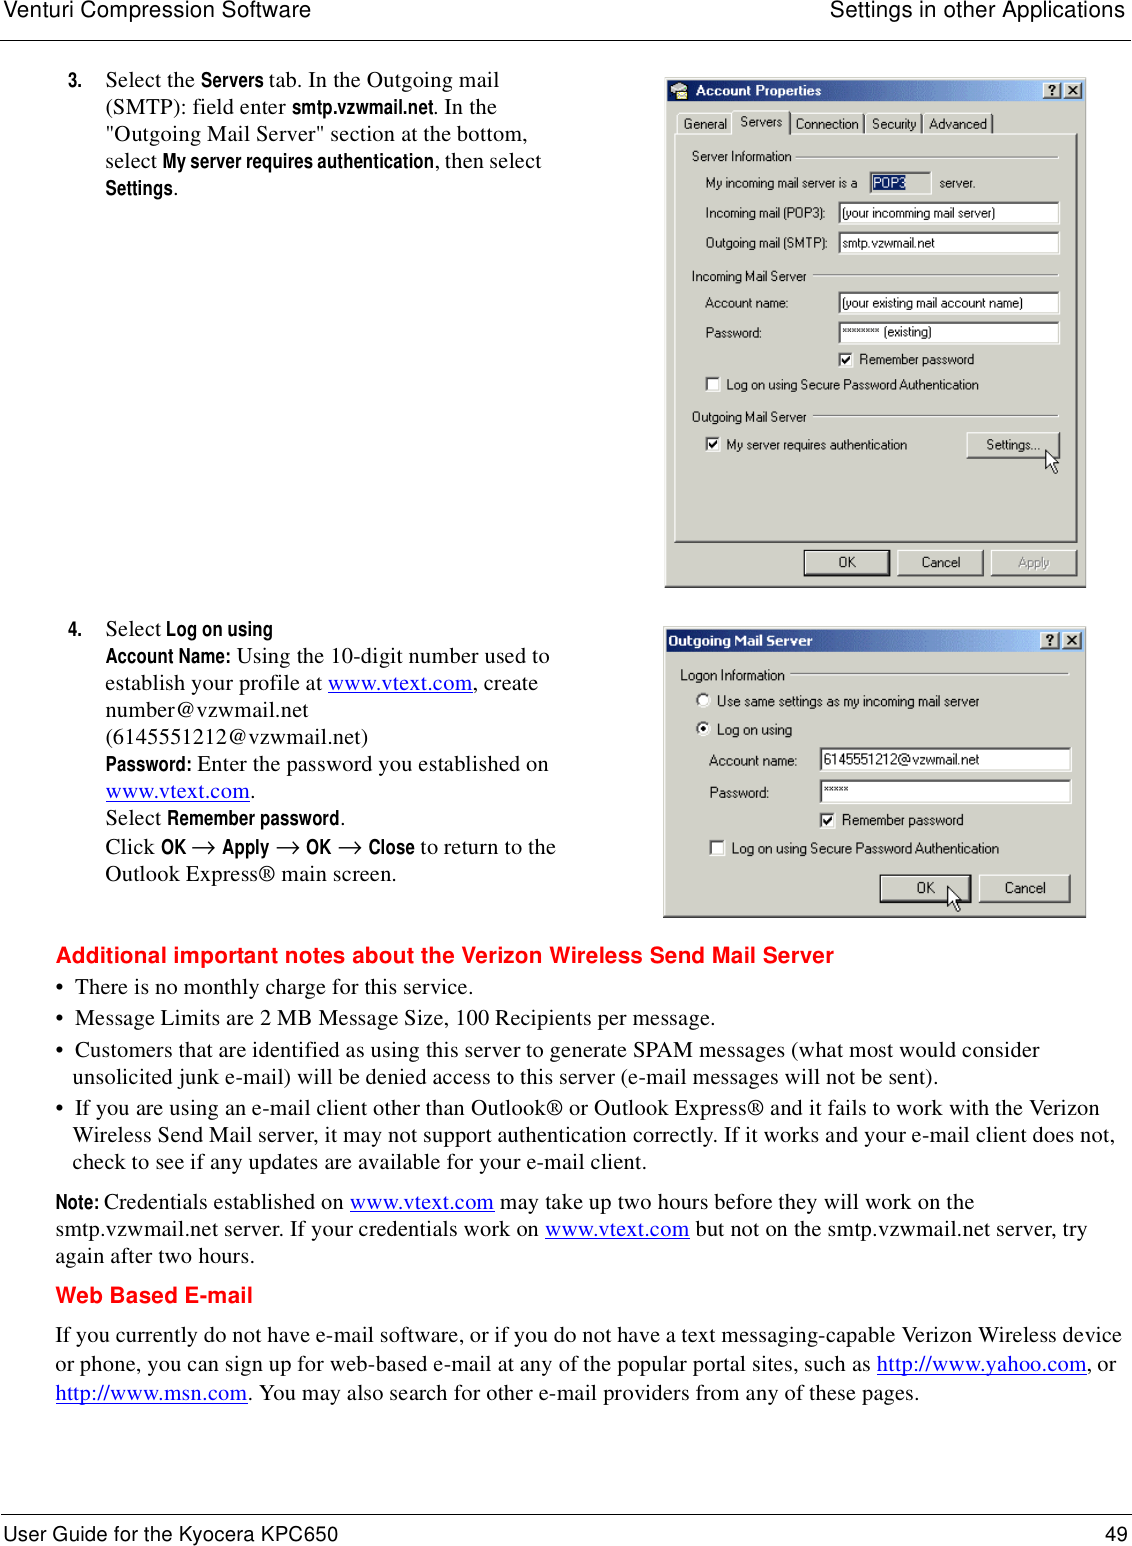 Venturi Compression Software Settings in other ApplicationsUser Guide for the Kyocera KPC650 49 Additional important notes about the Verizon Wireless Send Mail Server•  There is no monthly charge for this service.•  Message Limits are 2 MB Message Size, 100 Recipients per message.•  Customers that are identified as using this server to generate SPAM messages (what most would consider unsolicited junk e-mail) will be denied access to this server (e-mail messages will not be sent).•  If you are using an e-mail client other than Outlook® or Outlook Express® and it fails to work with the Verizon Wireless Send Mail server, it may not support authentication correctly. If it works and your e-mail client does not, check to see if any updates are available for your e-mail client.Note: Credentials established on www.vtext.com may take up two hours before they will work on the smtp.vzwmail.net server. If your credentials work on www.vtext.com but not on the smtp.vzwmail.net server, try again after two hours. Web Based E-mailIf you currently do not have e-mail software, or if you do not have a text messaging-capable Verizon Wireless device or phone, you can sign up for web-based e-mail at any of the popular portal sites, such as http://www.yahoo.com, or http://www.msn.com. You may also search for other e-mail providers from any of these pages.3. Select the Servers tab. In the Outgoing mail (SMTP): field enter smtp.vzwmail.net. In the &quot;Outgoing Mail Server&quot; section at the bottom, select My server requires authentication, then select Settings.4. Select Log on usingAccount Name: Using the 10-digit number used to establish your profile at www.vtext.com, create number@vzwmail.net (6145551212@vzwmail.net) Password: Enter the password you established on www.vtext.com. Select Remember password.Click OK → Apply → OK → Close to return to the Outlook Express® main screen.